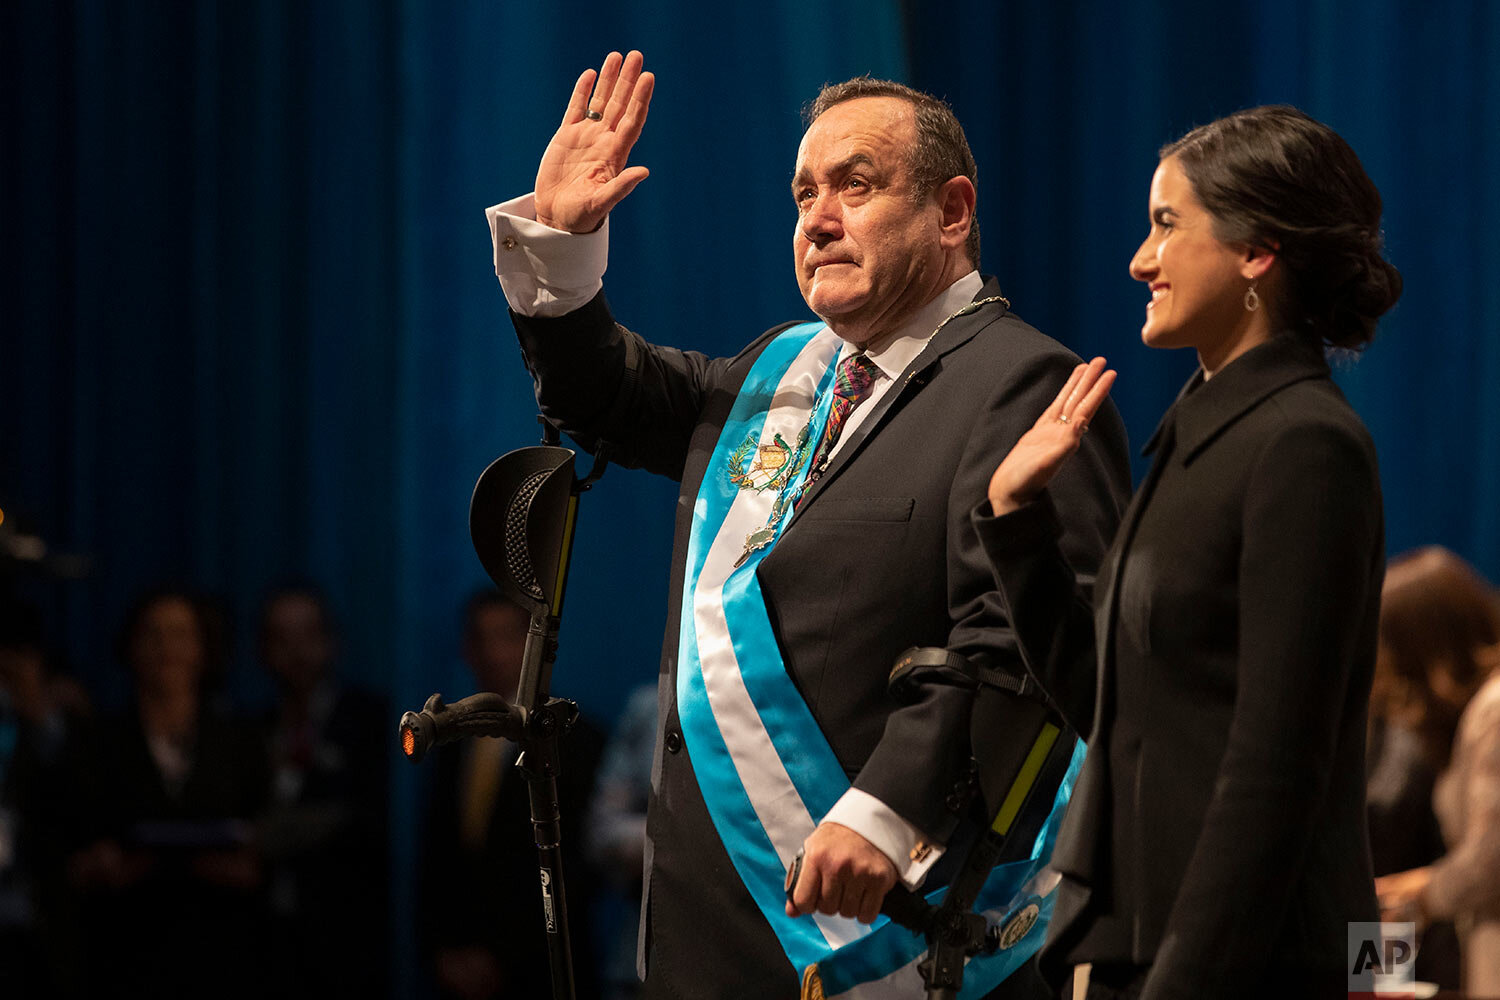  Alejandro Giammattei waves to the crowd accompanied by his daughter Ana Marcela after he was sworn-in as president of Guatemala at the National Theater in Guatemala City, Tuesday, Jan. 14, 2020. (AP Photo/Moises Castillo) 